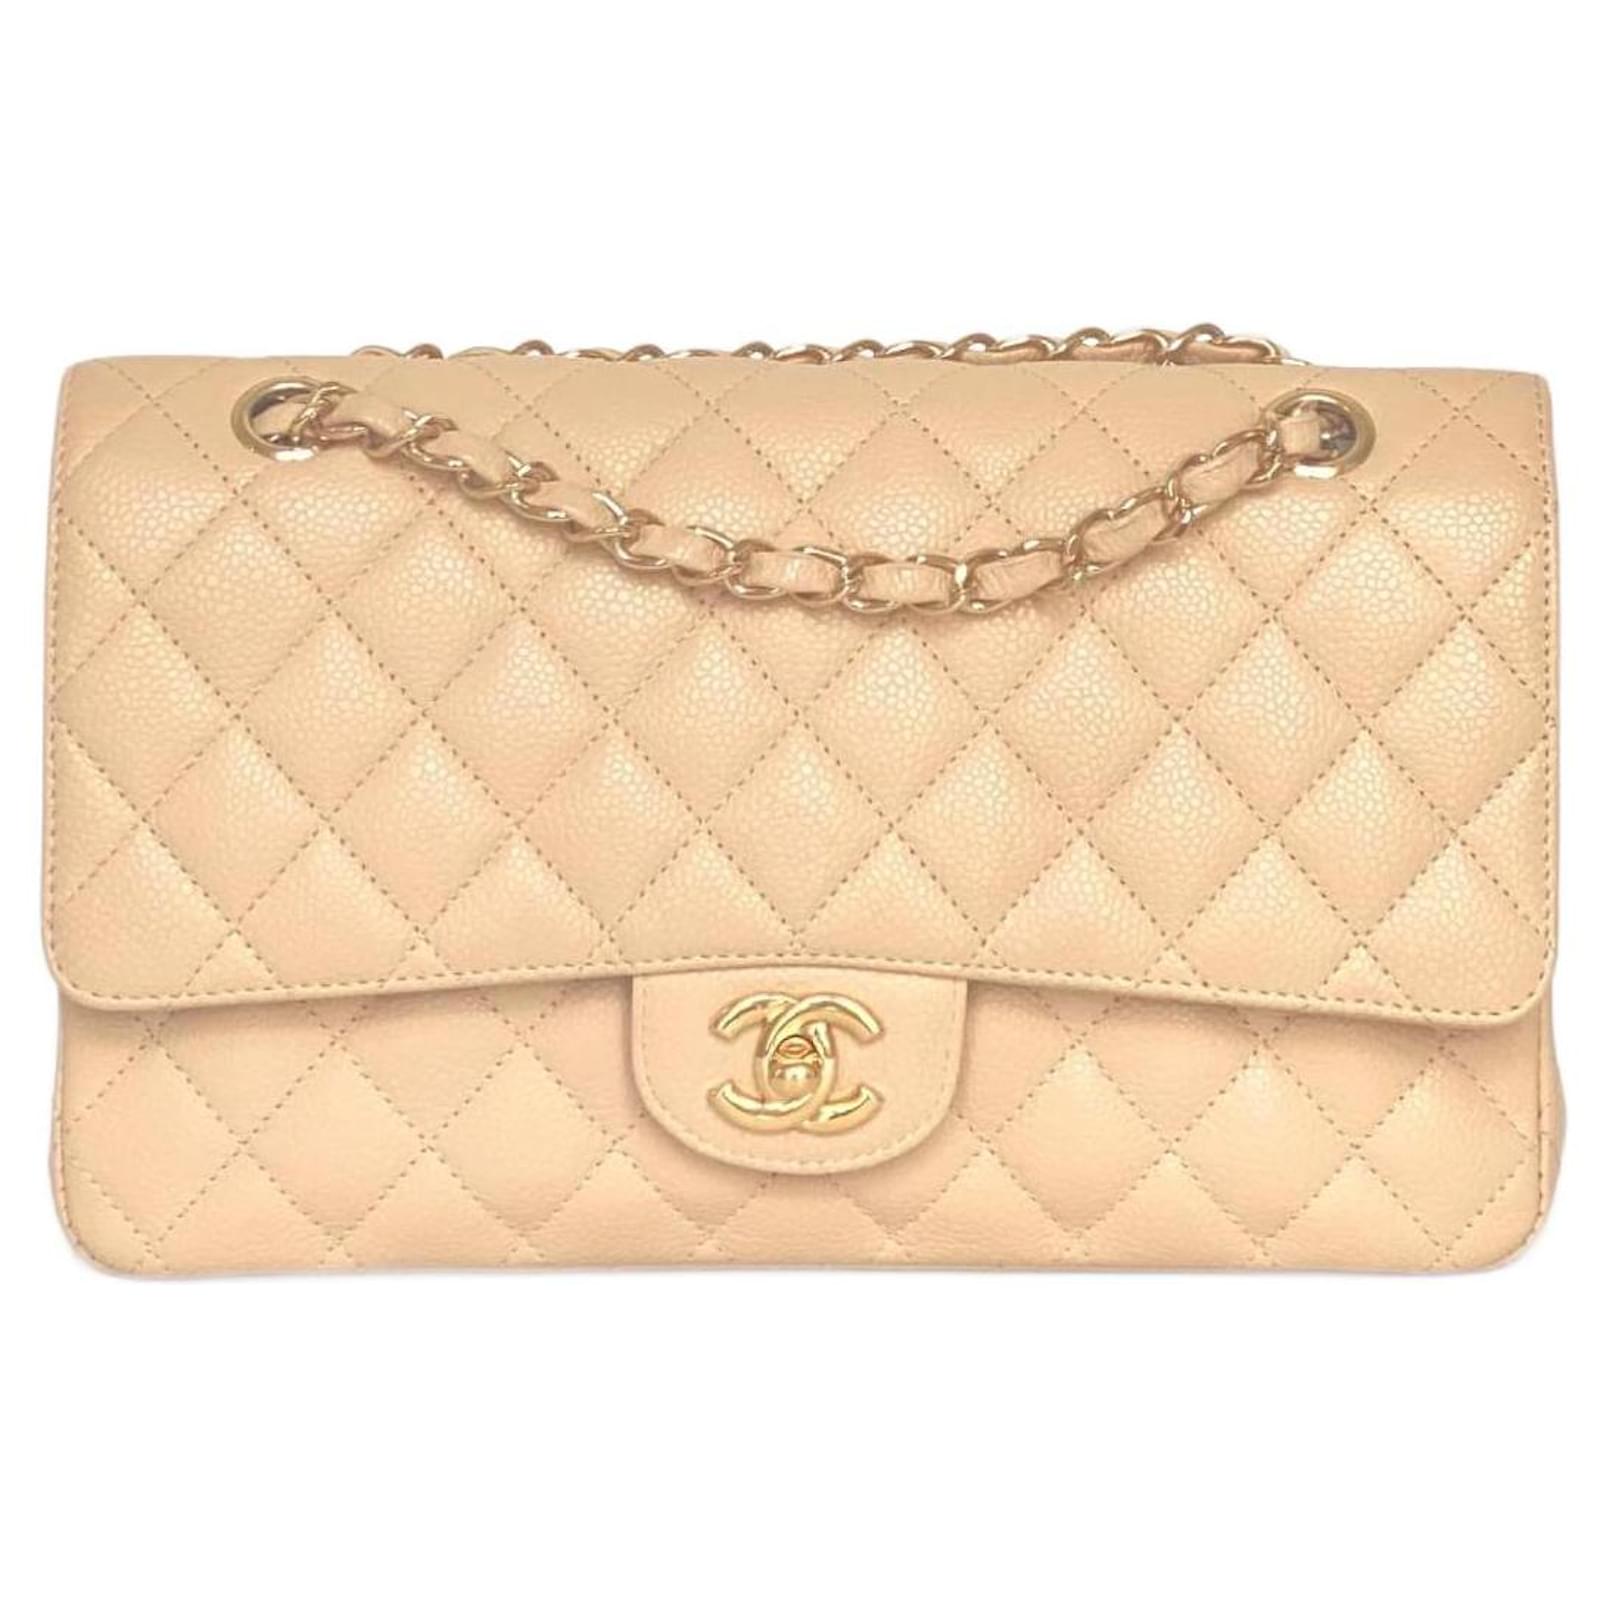 Chanel Baby Pink Quilted Lambskin Flap Bag Aged Gold Hardware (Like New)